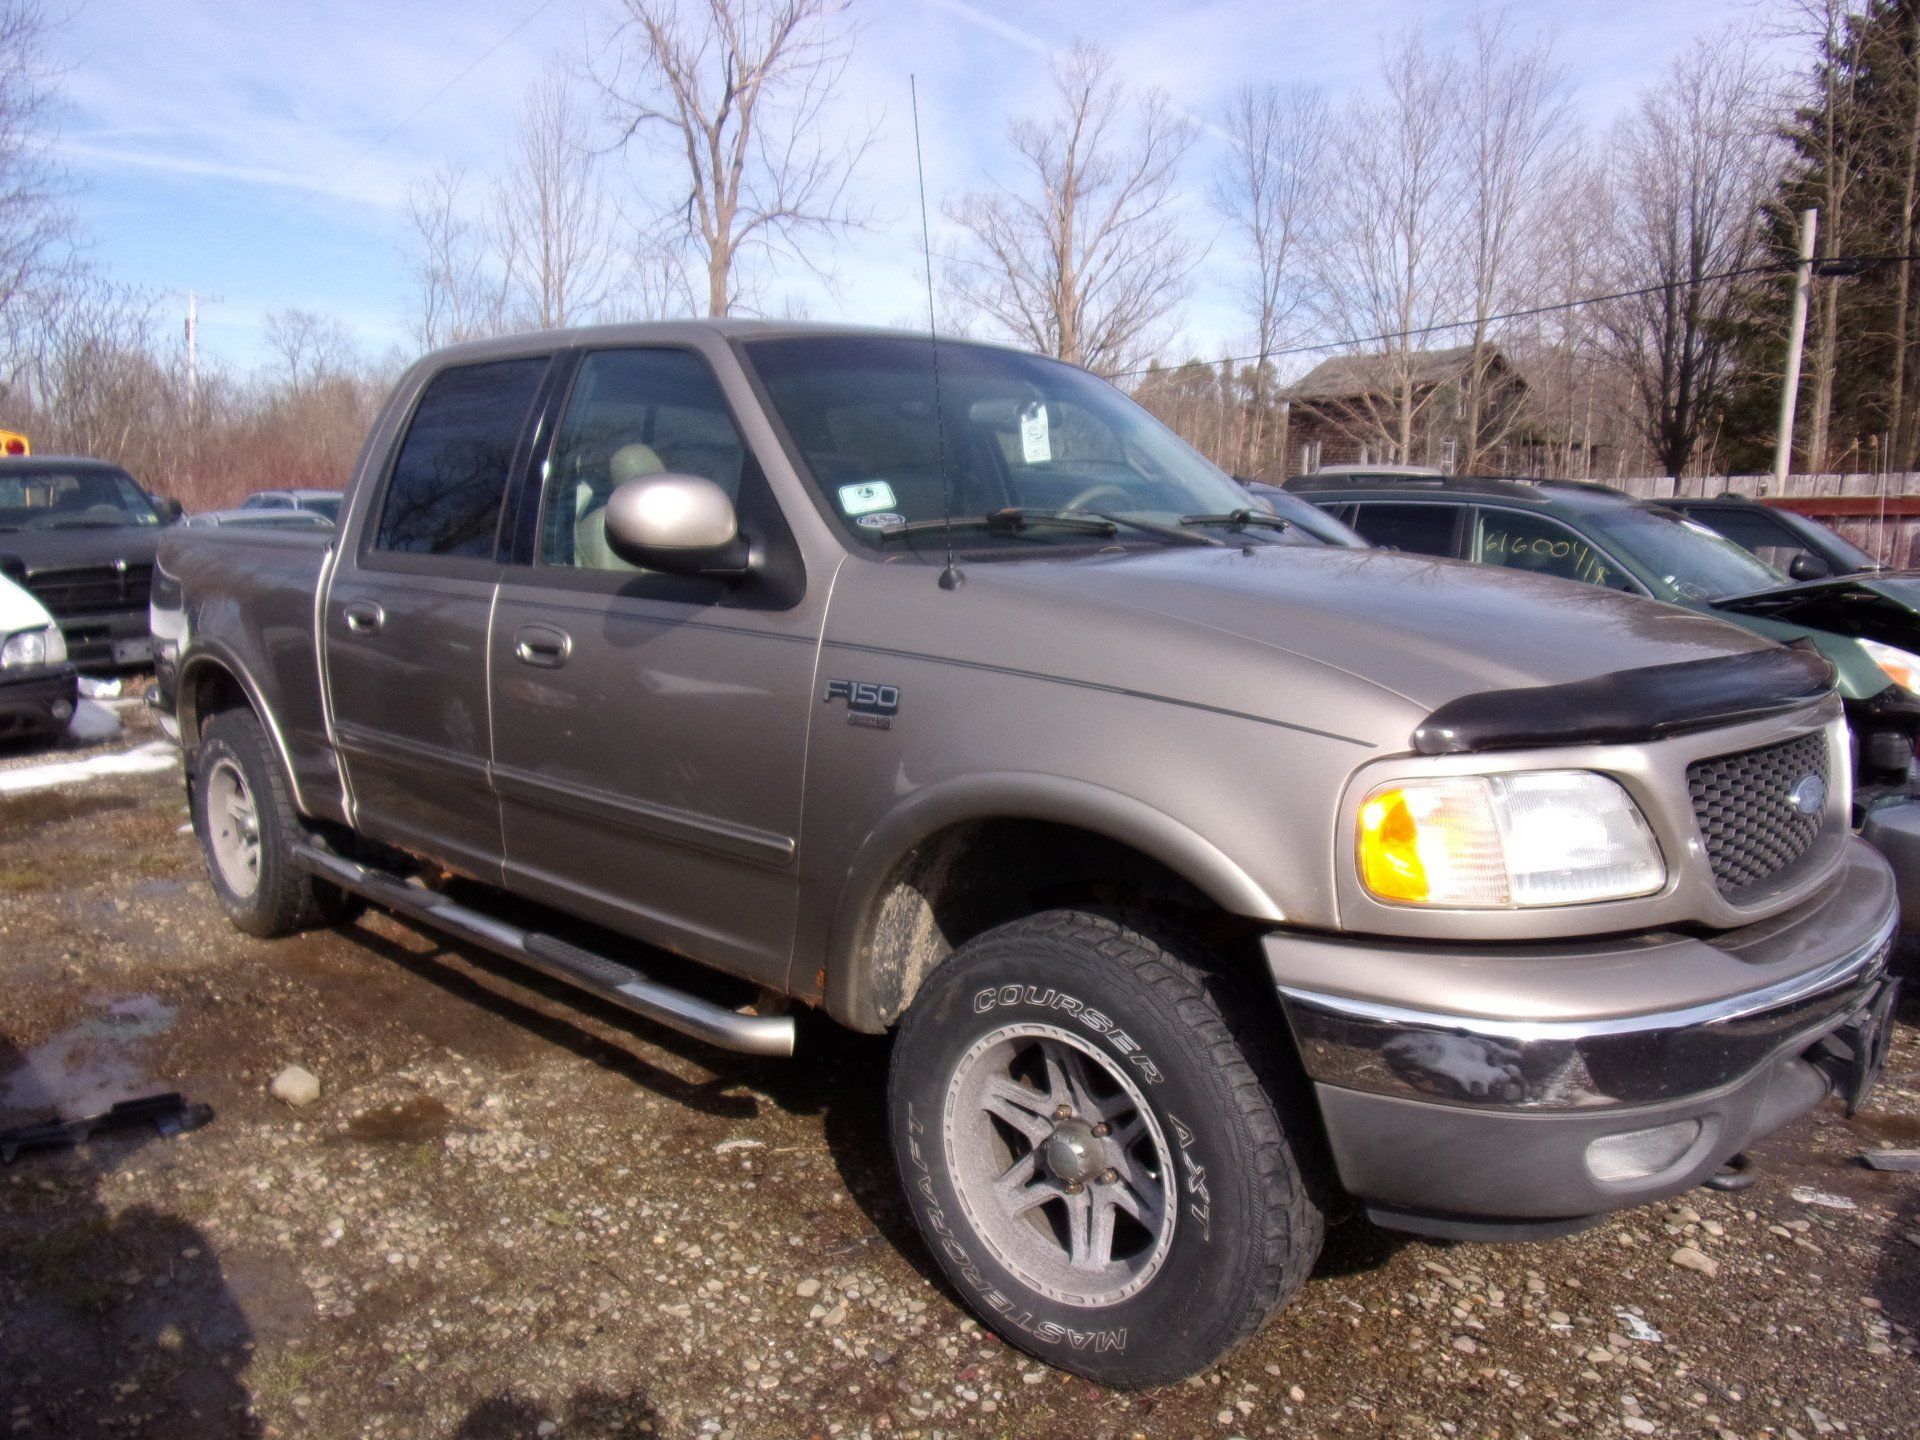 a ford f150 truck is parked in a gravel lot